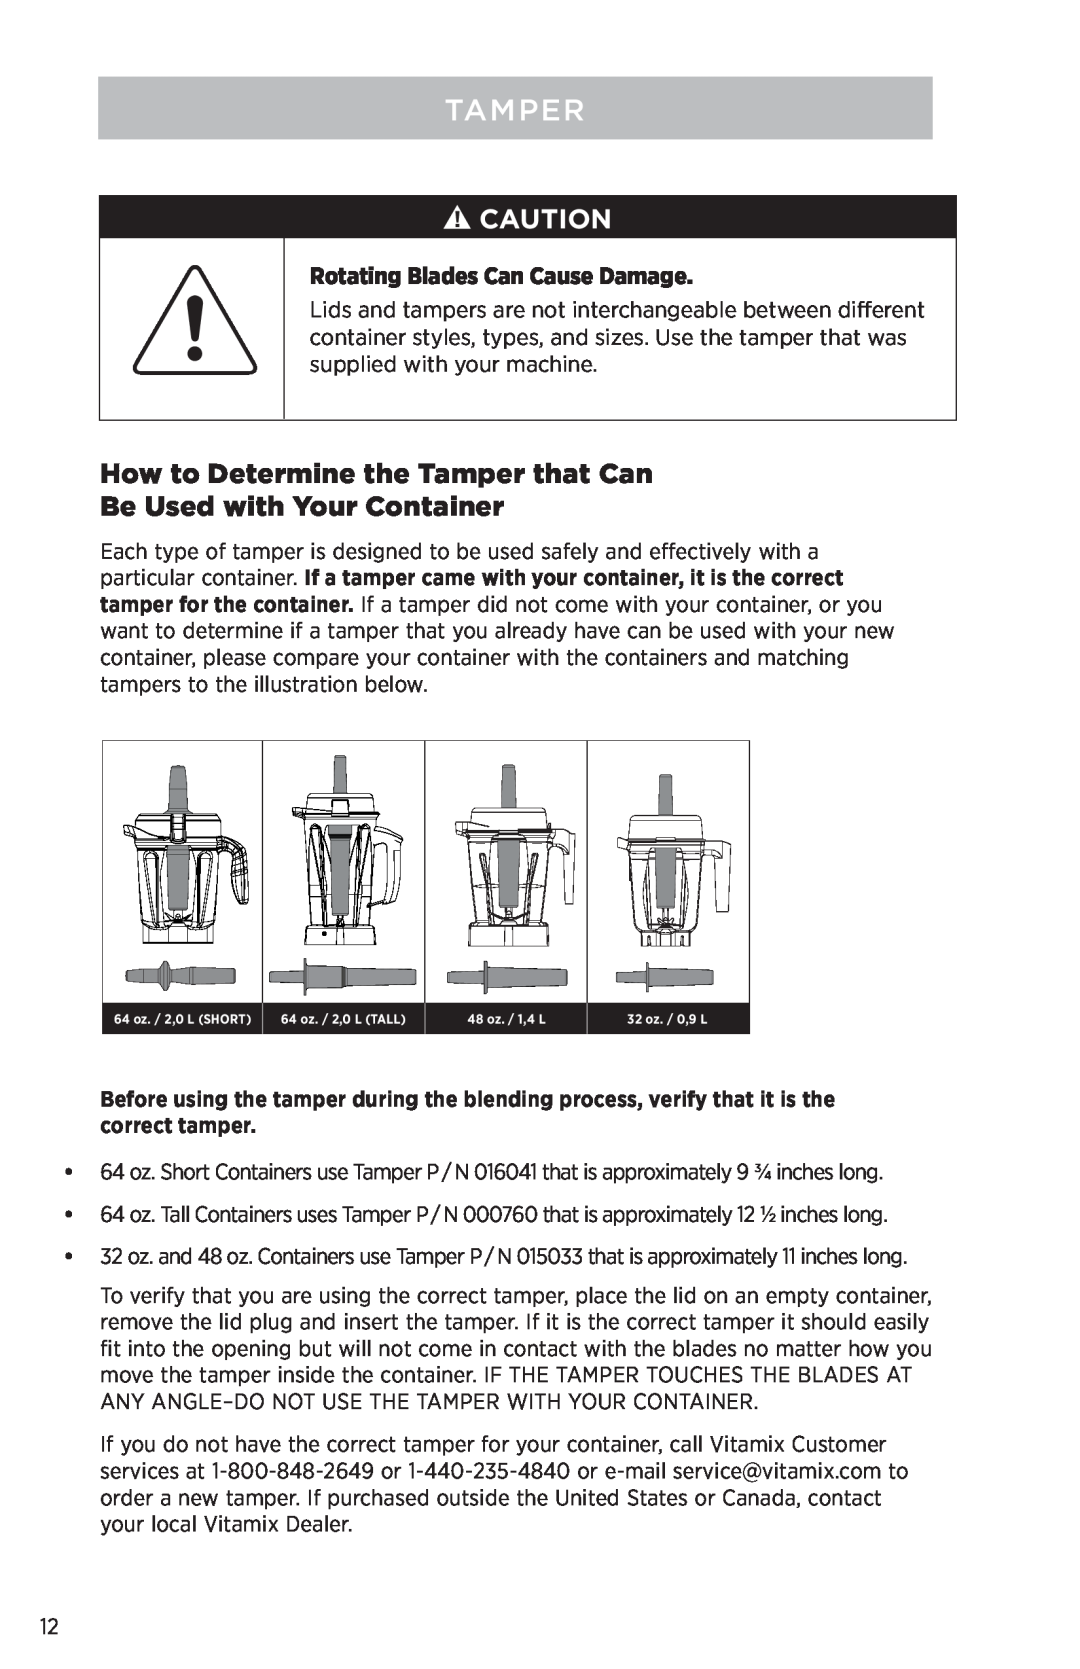 Vita-Mix PROFESSIONAL SERIES 750 manual How to Determine the Tamper that Can Be Used with Your Container 